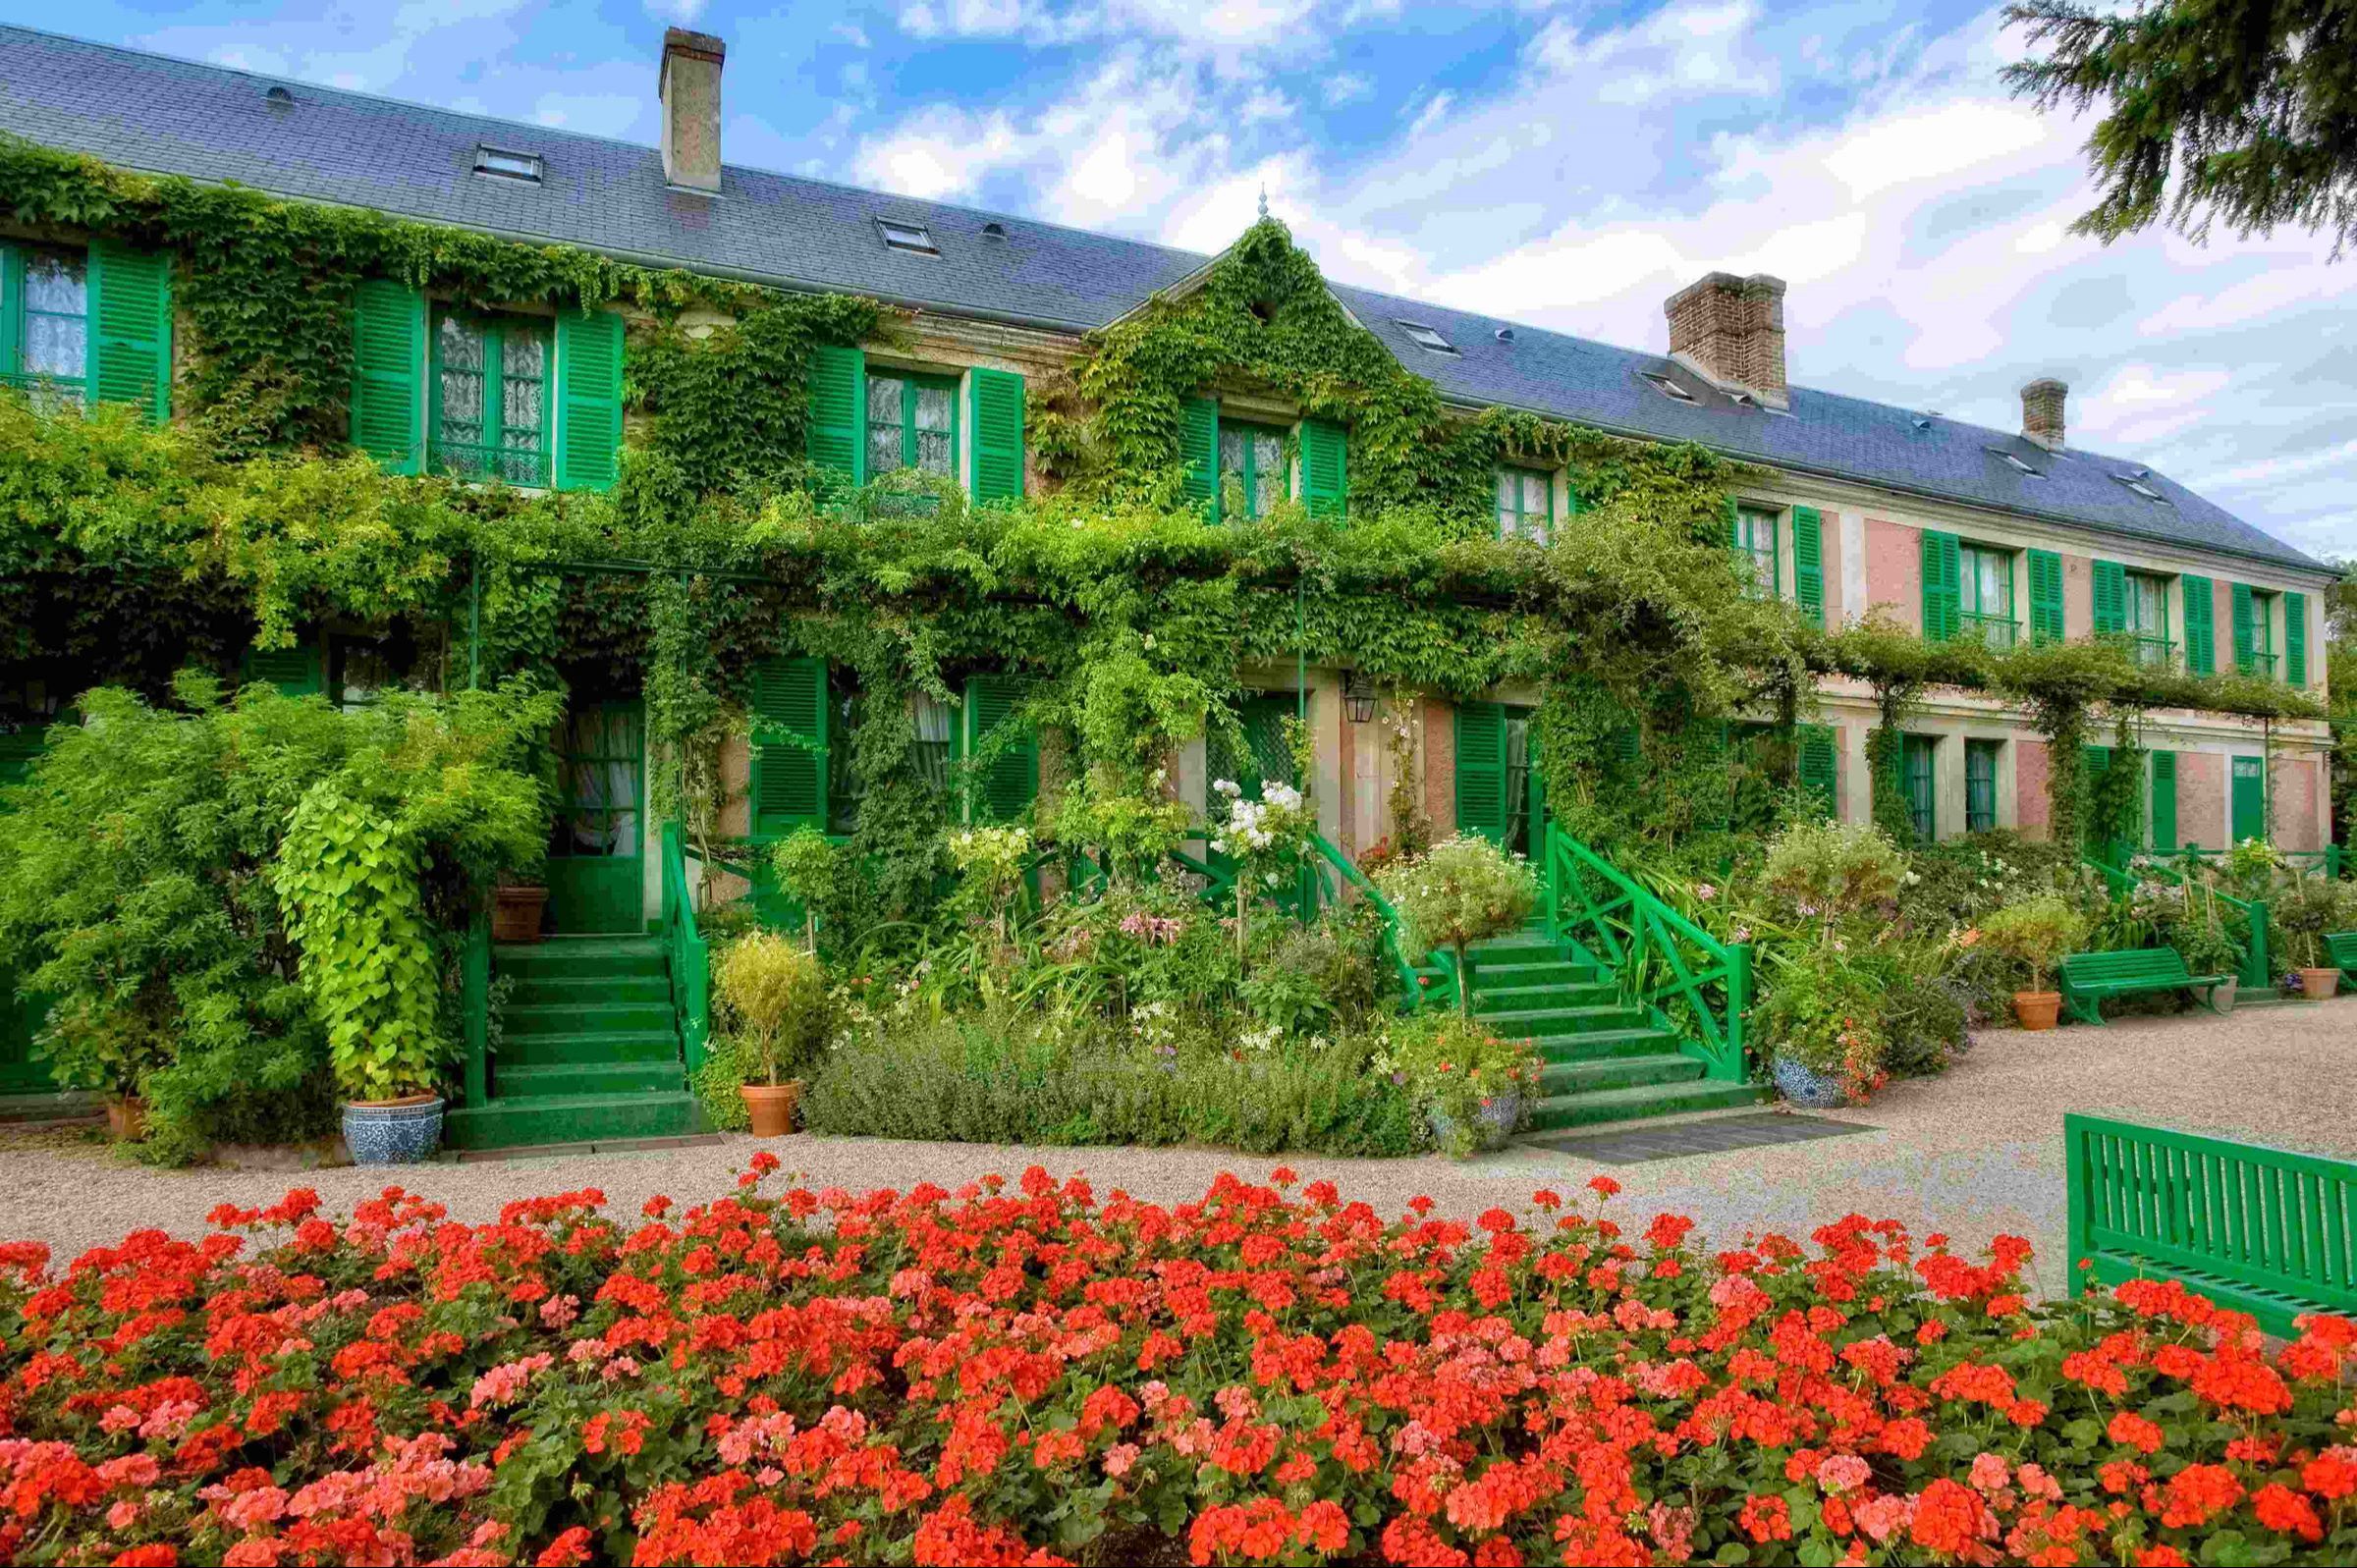 Half Day Trip Giverny Monet's Gardens Audio Guided Tour from Paris with transportation